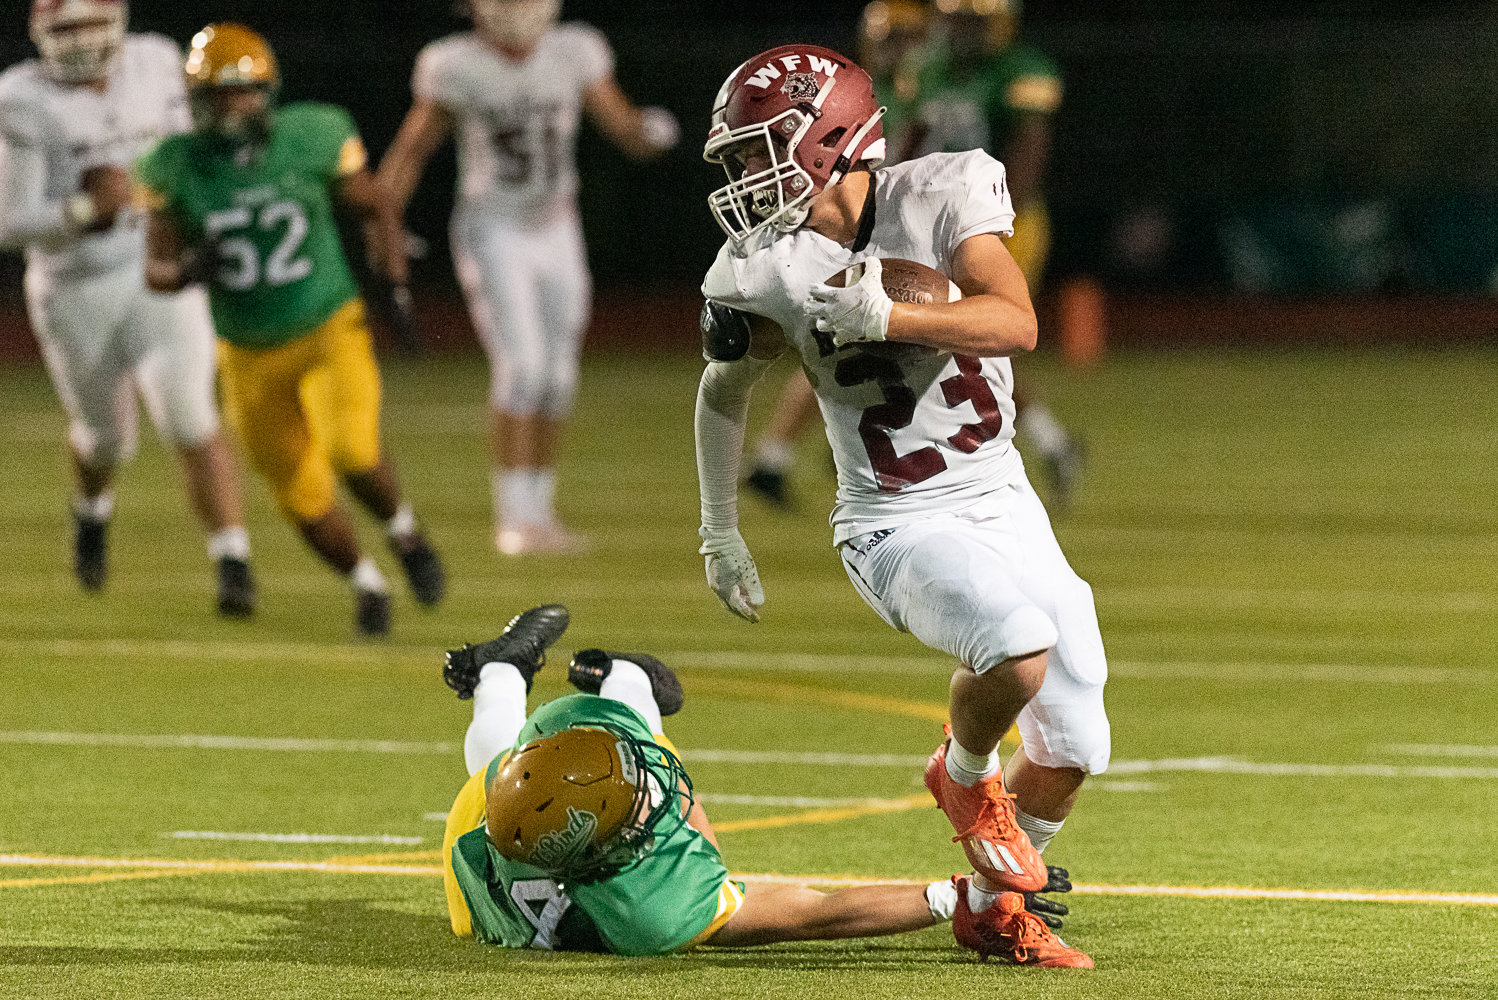 Evan Stajduhar evades a would-be tackler during the second quarter of W.F. West's 28-7 win over Tumwater on Sept. 30.